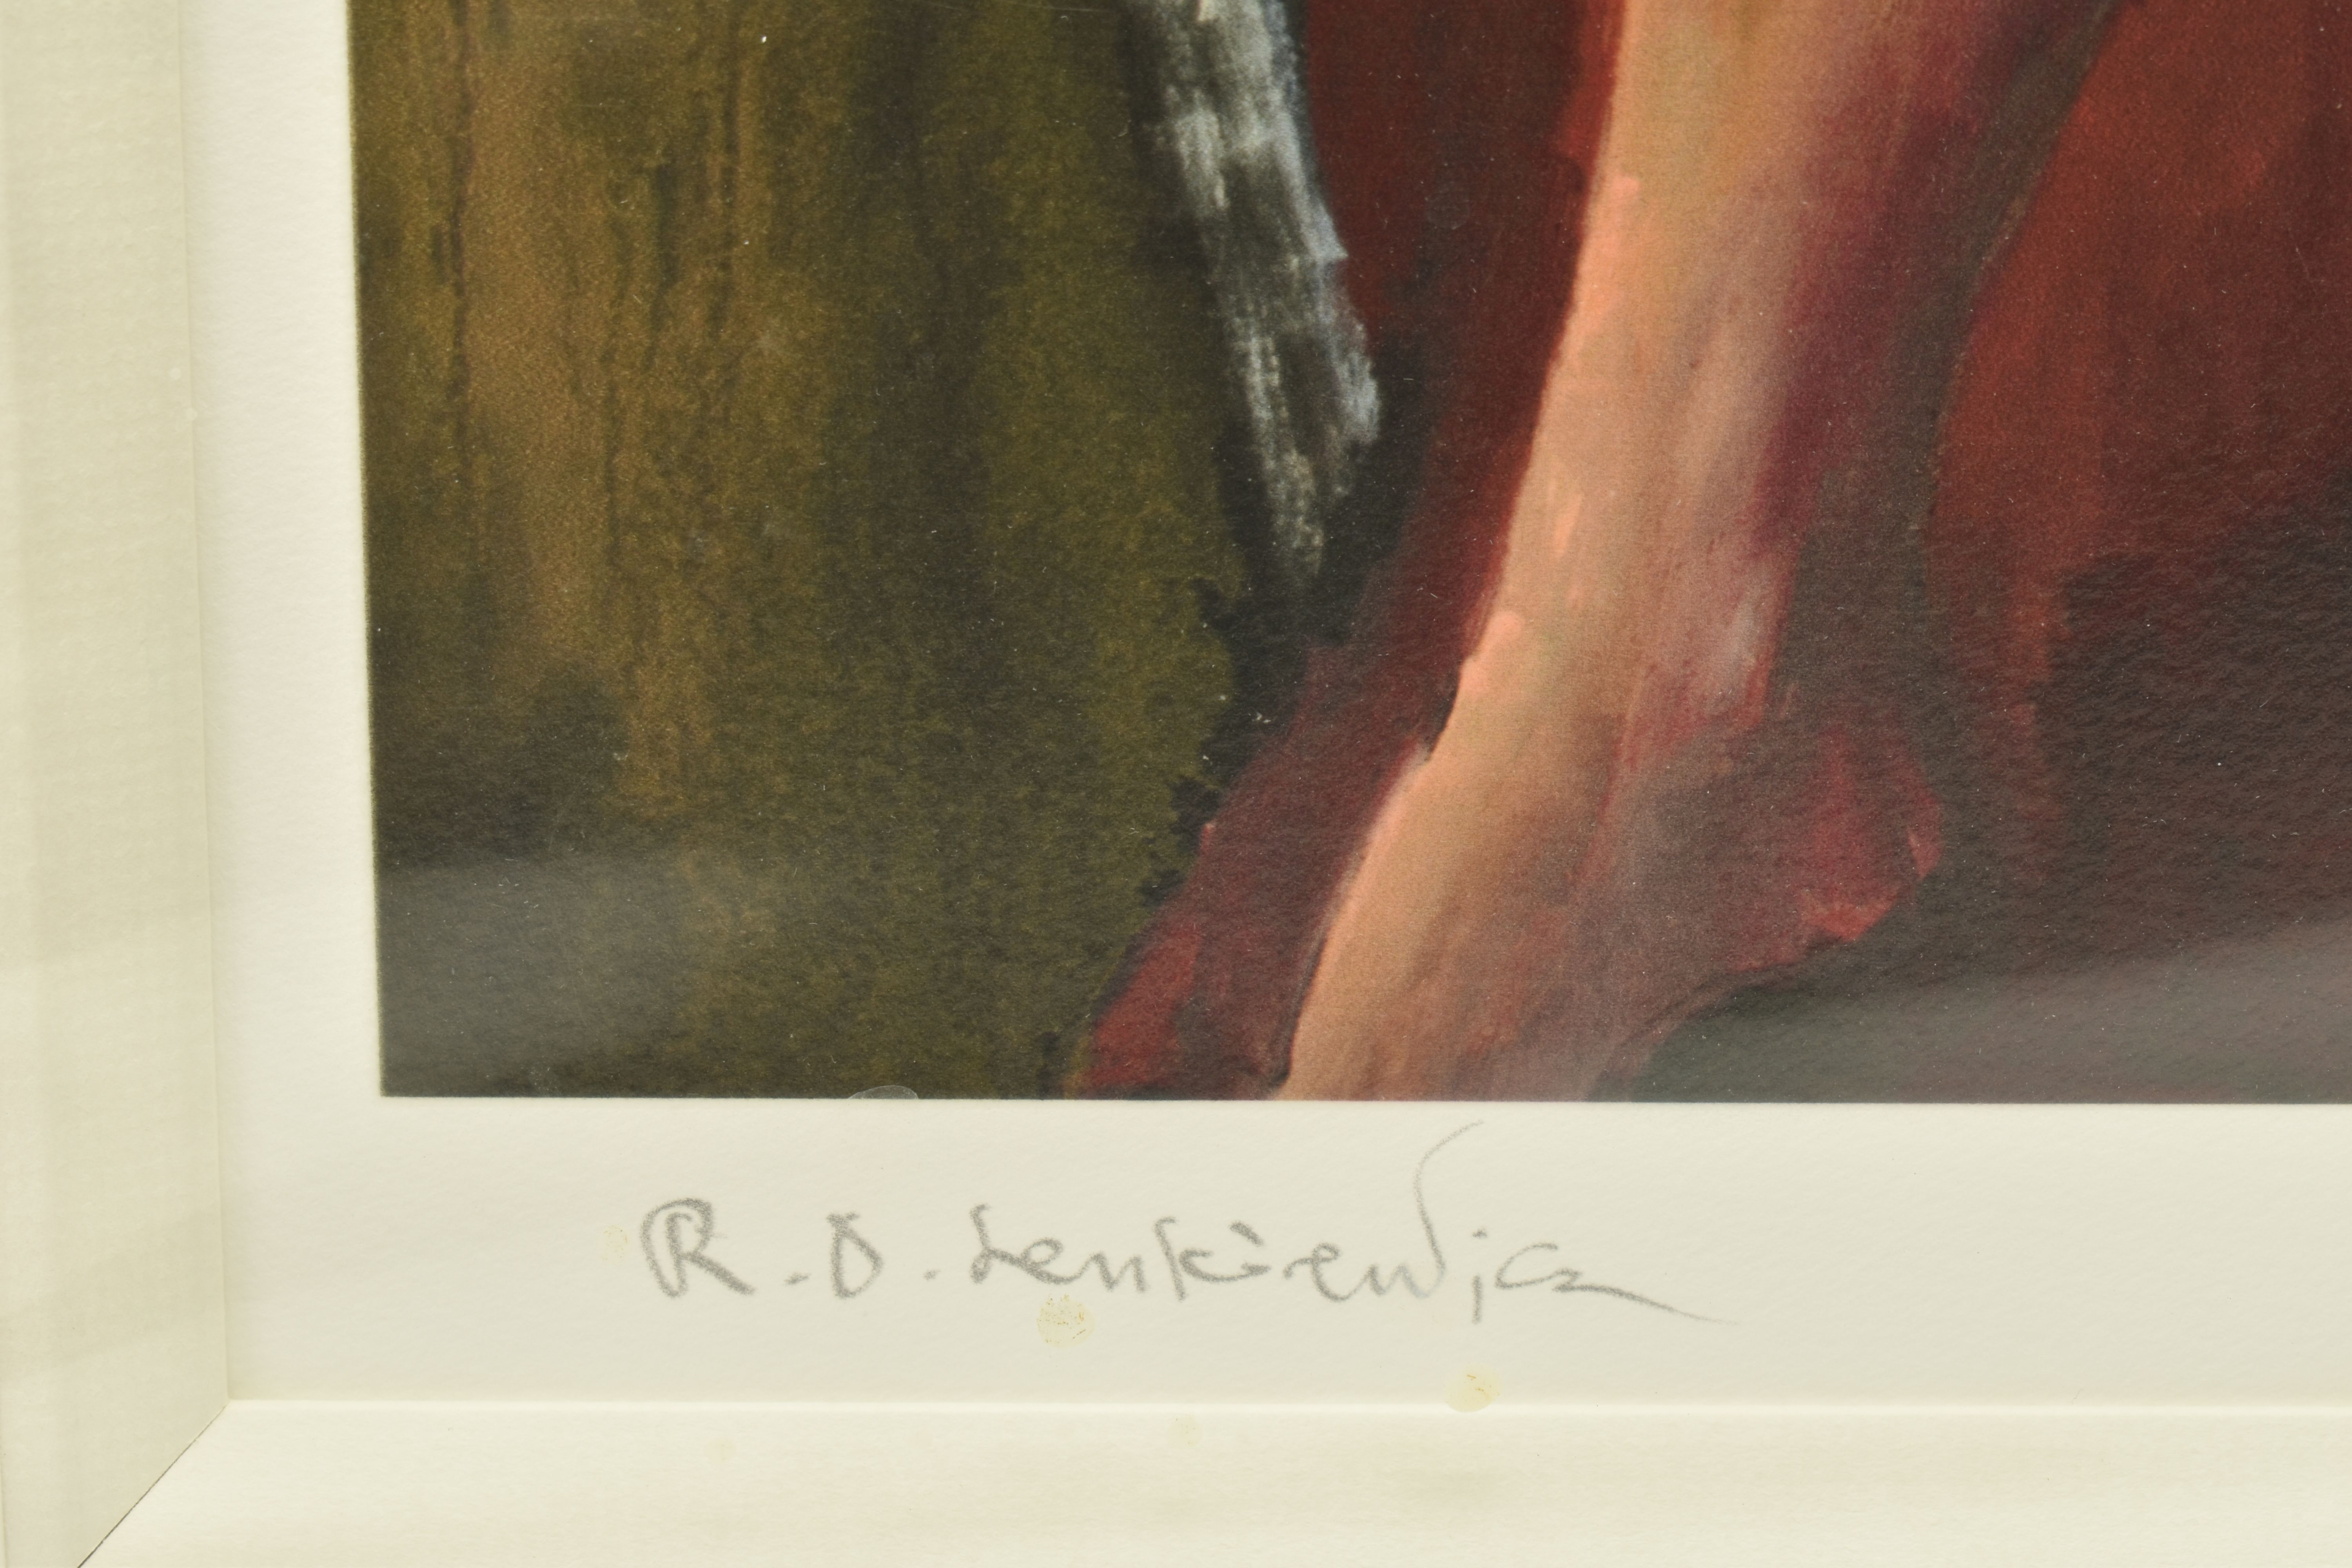 ROBERT LENKIEWICZ (1941-2002) 'THE PAINTER WITH BENEDIKTE', a limited edition print depicting the - Image 5 of 8